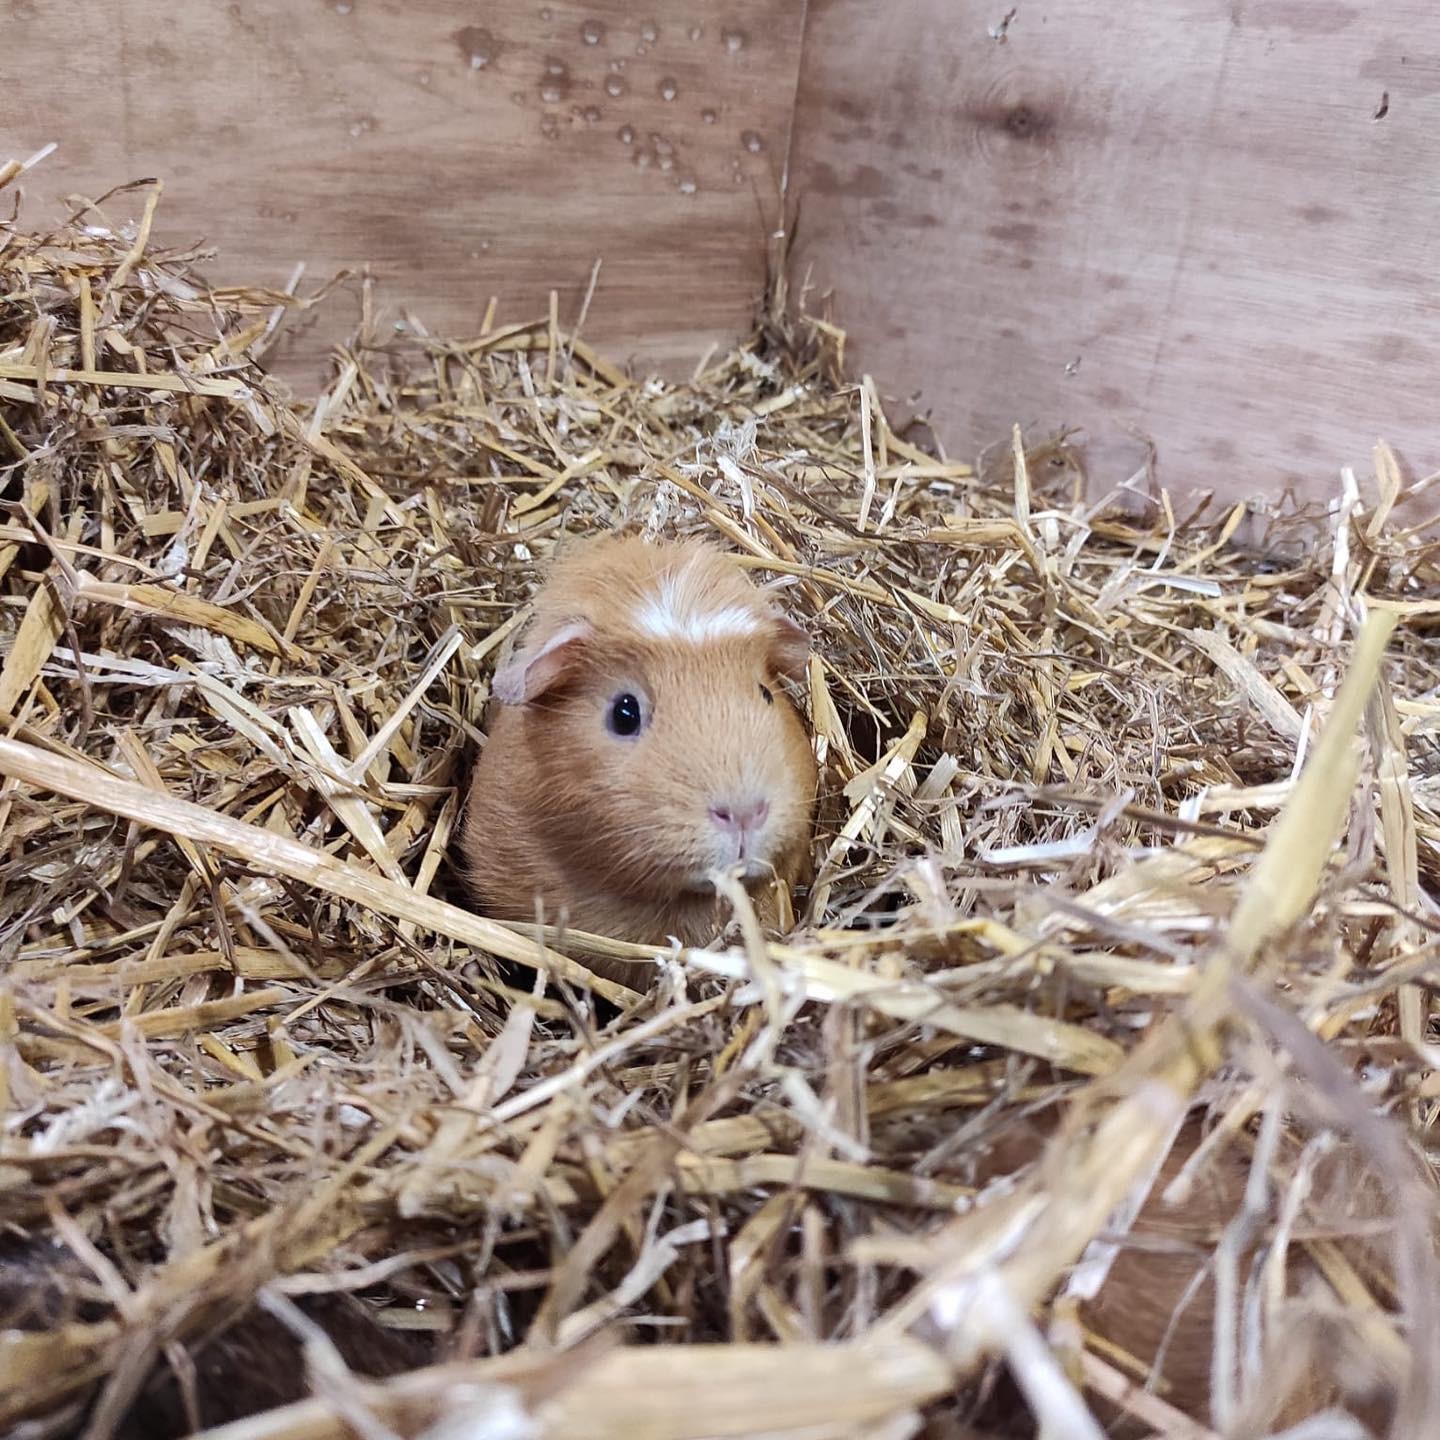 Guinea Pig In a Box of Hay